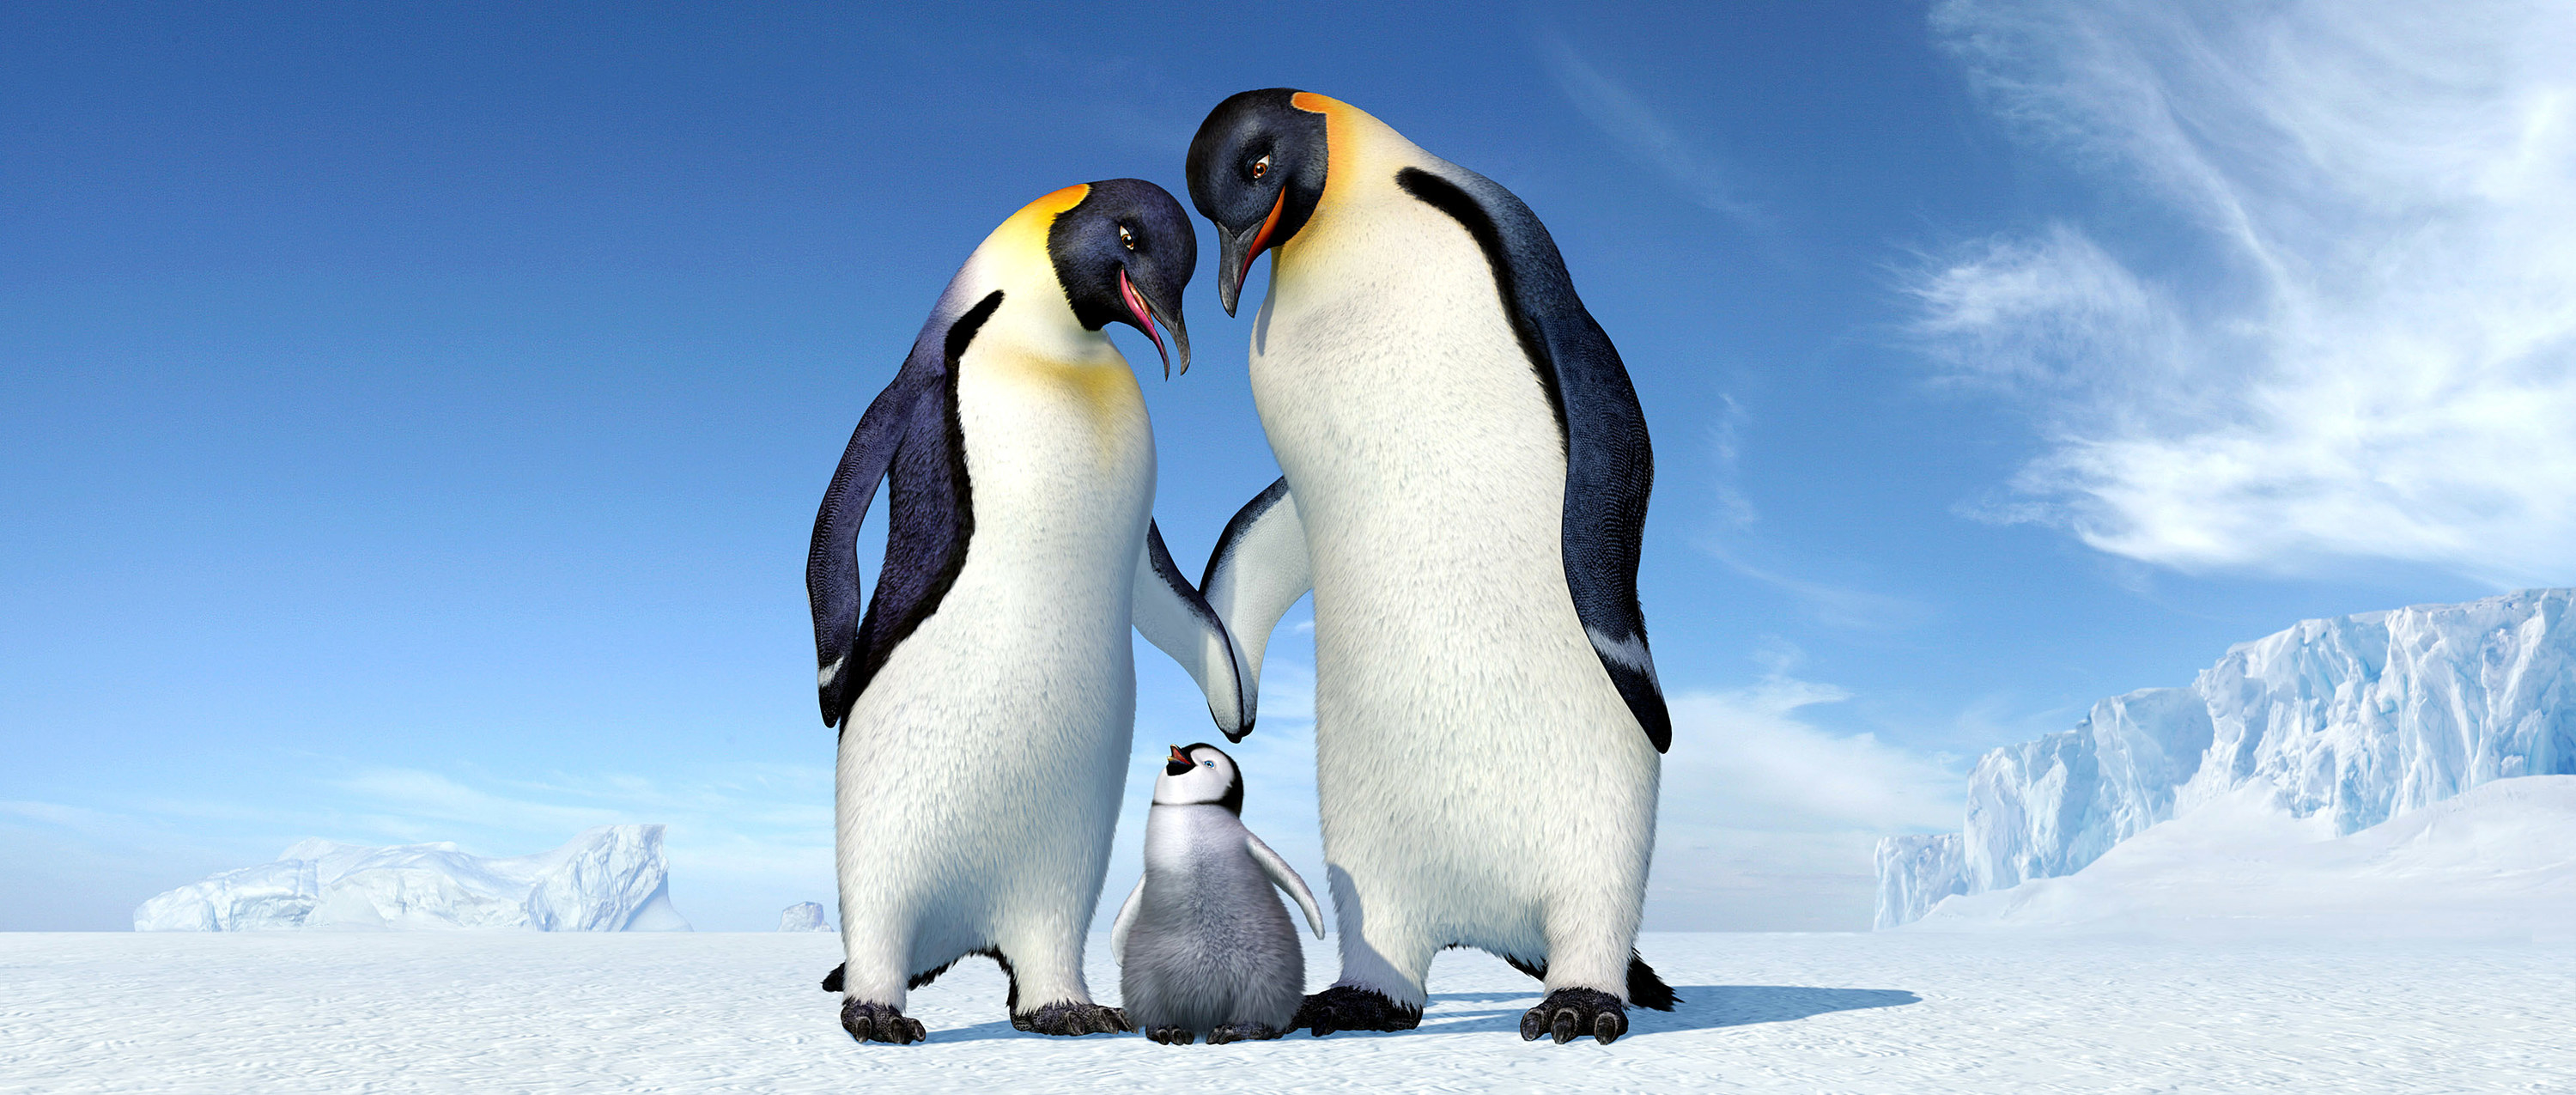 Three penguins stand together